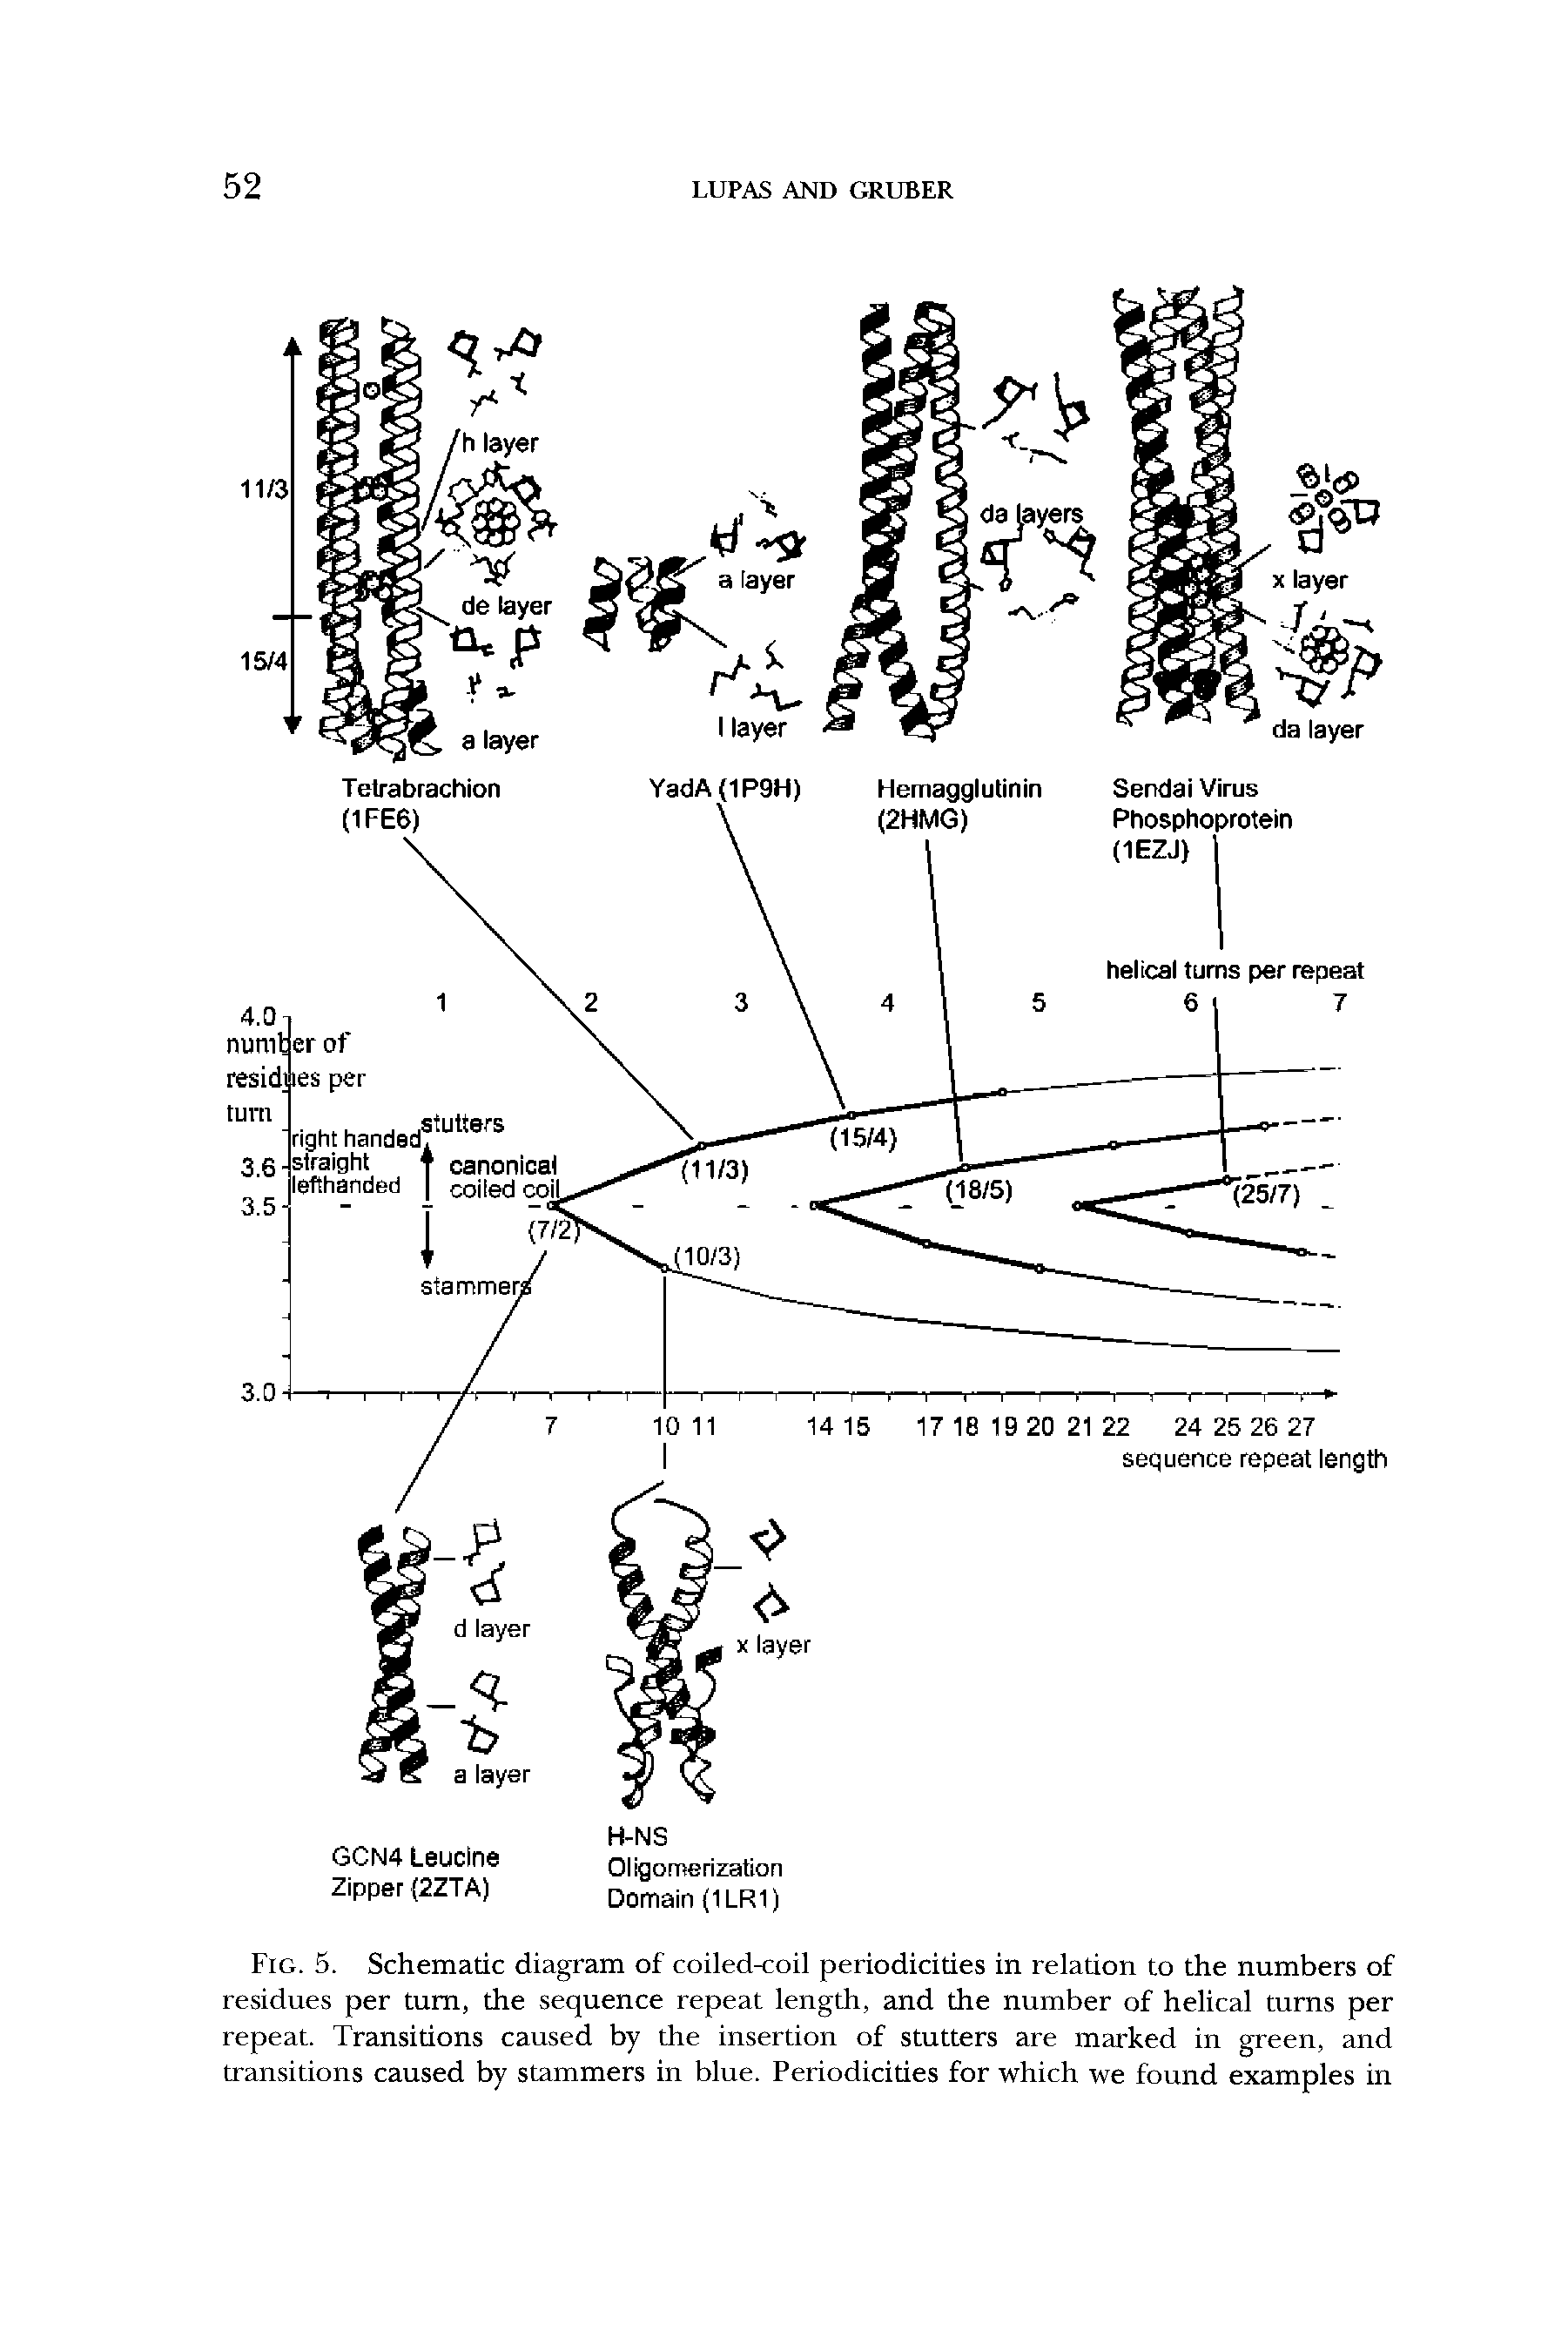 Fig. 5. Schematic diagram of coiled-coil periodicities in relation to the numbers of residues per turn, the sequence repeat length, and the number of helical turns per repeat. Transitions caused by the insertion of stutters are marked in green, and transitions caused by stammers in blue. Periodicities for which we found examples in...